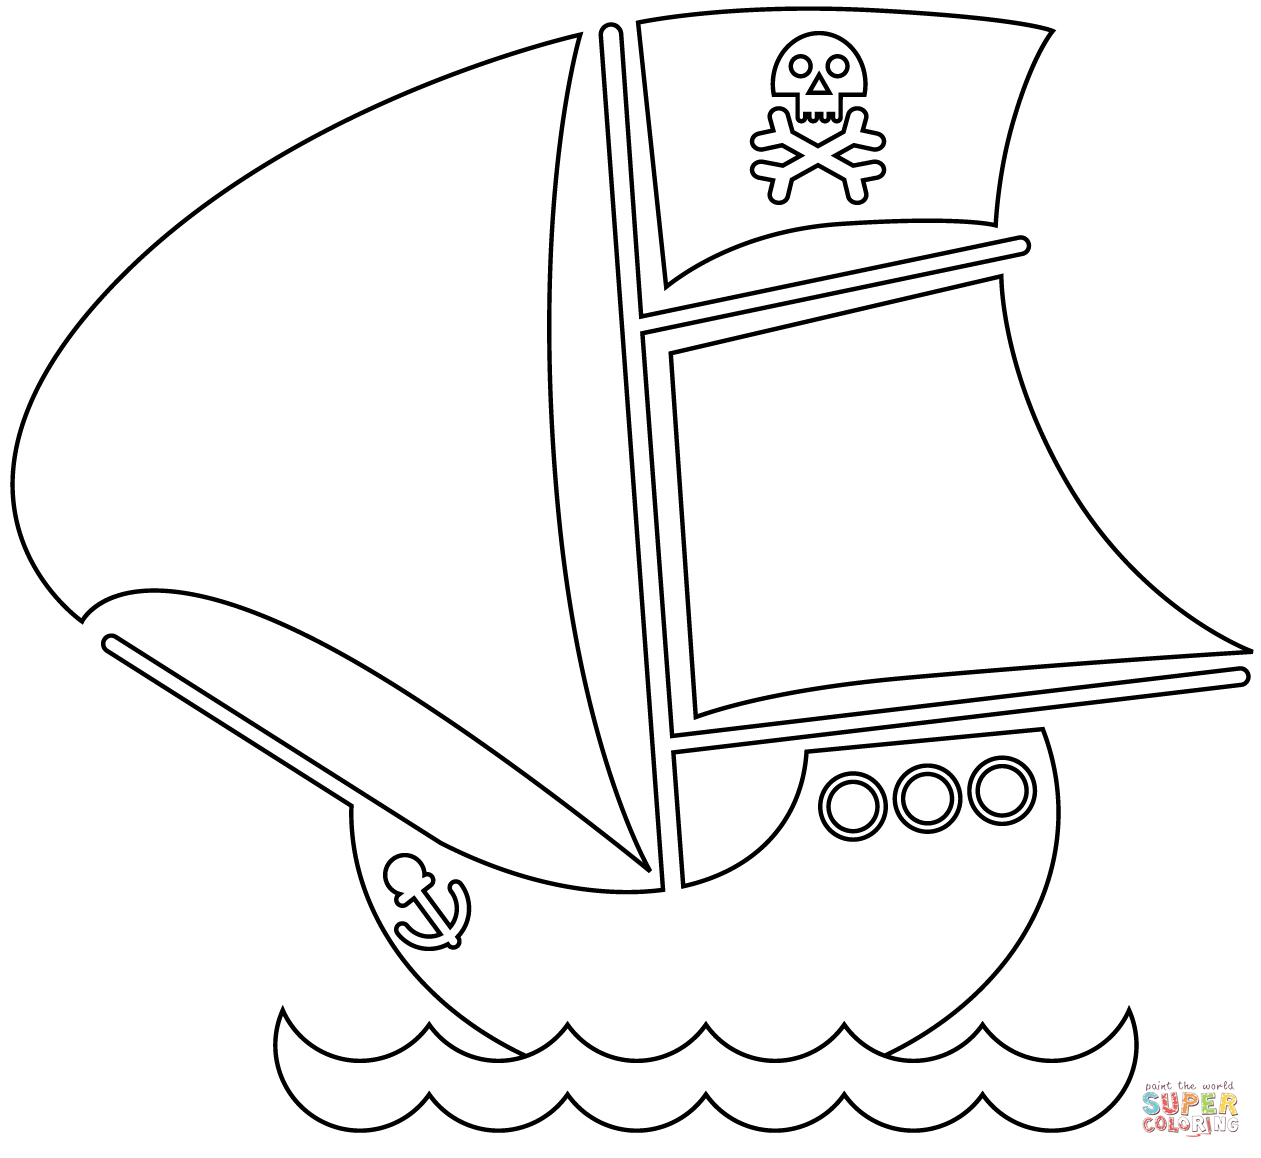 Pirate Ship coloring page | Free Printable Coloring Pages